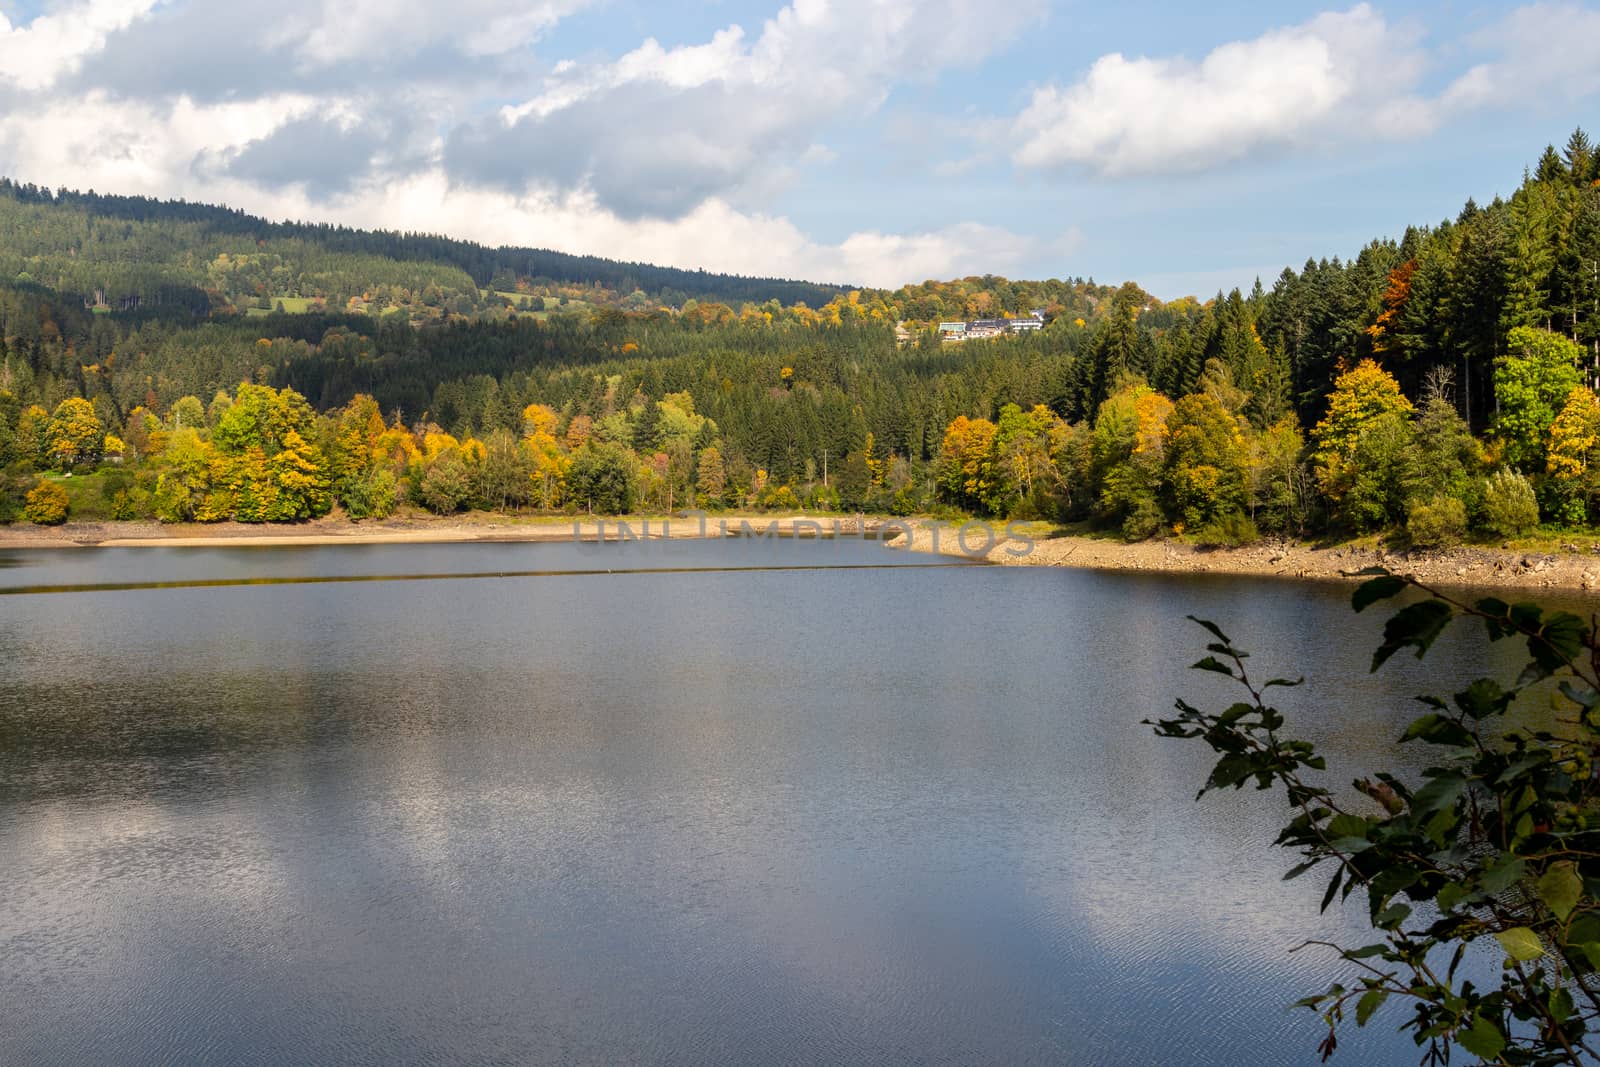 Idyllic view at Alb water reservoir in the Black Forest by reinerc